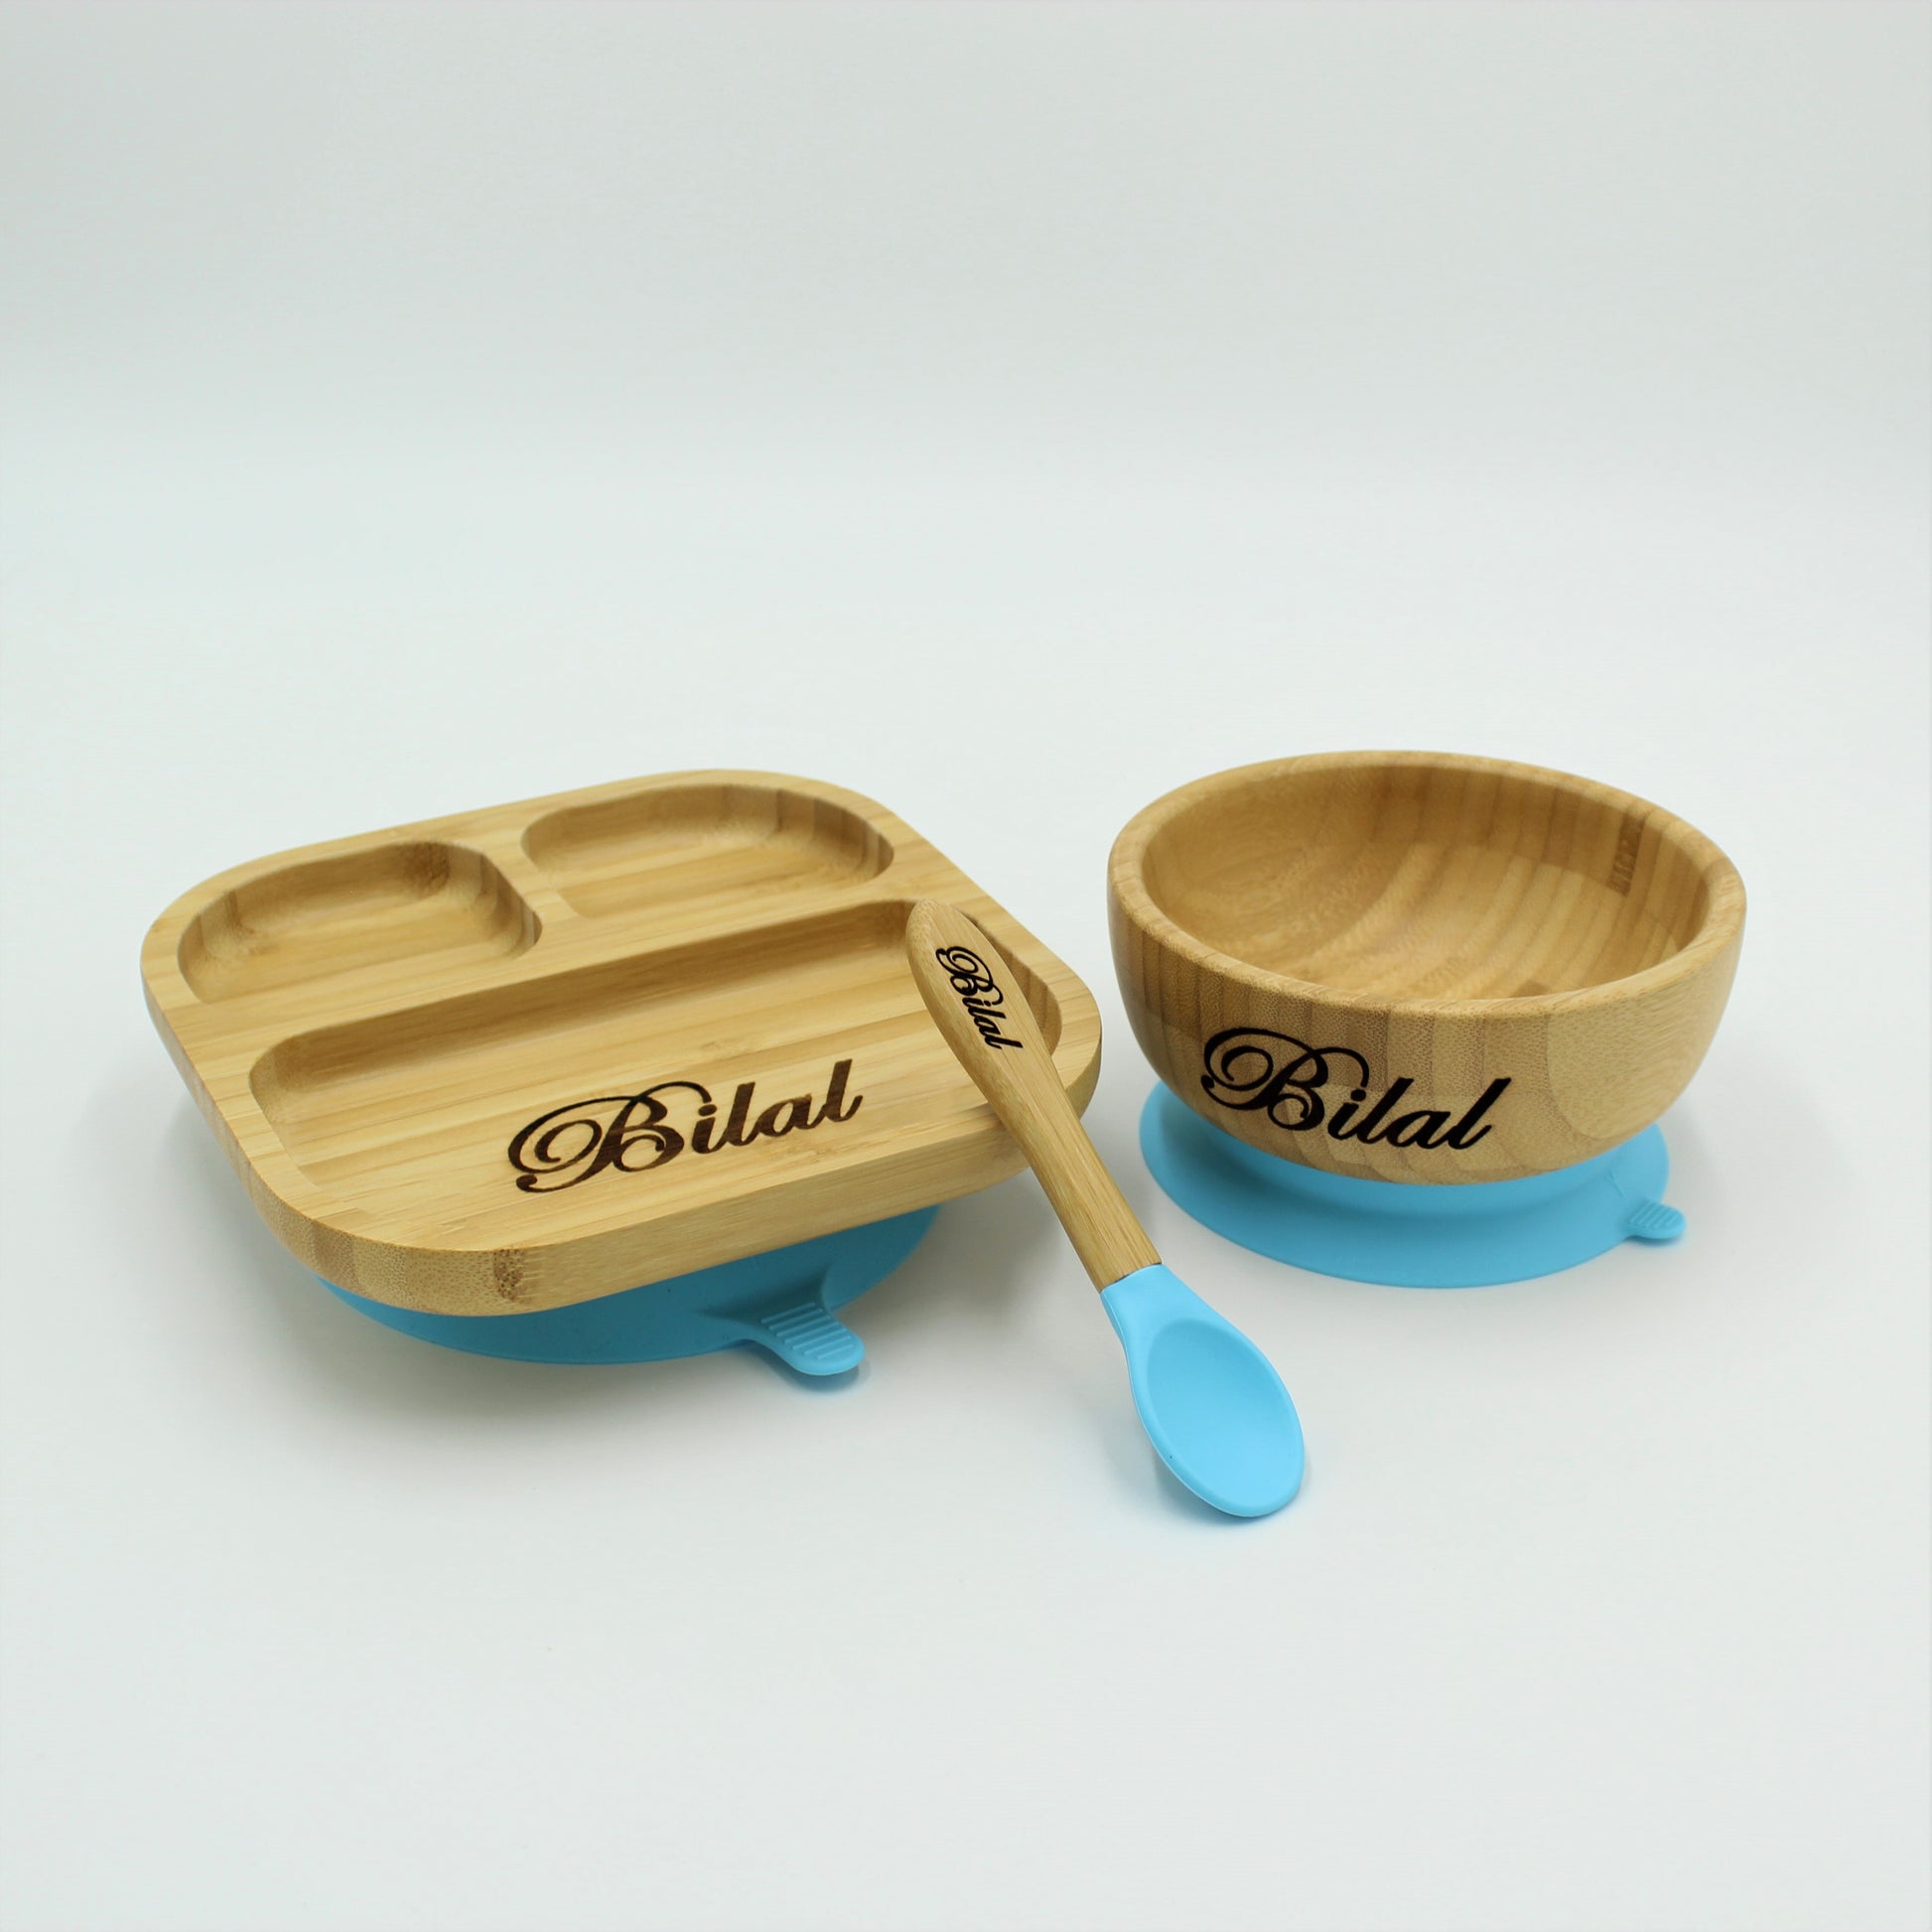 Personalised Wooden Tiny Dining Bamboo Plate, Bowl, and Spoon Set- Blue | Babba box.